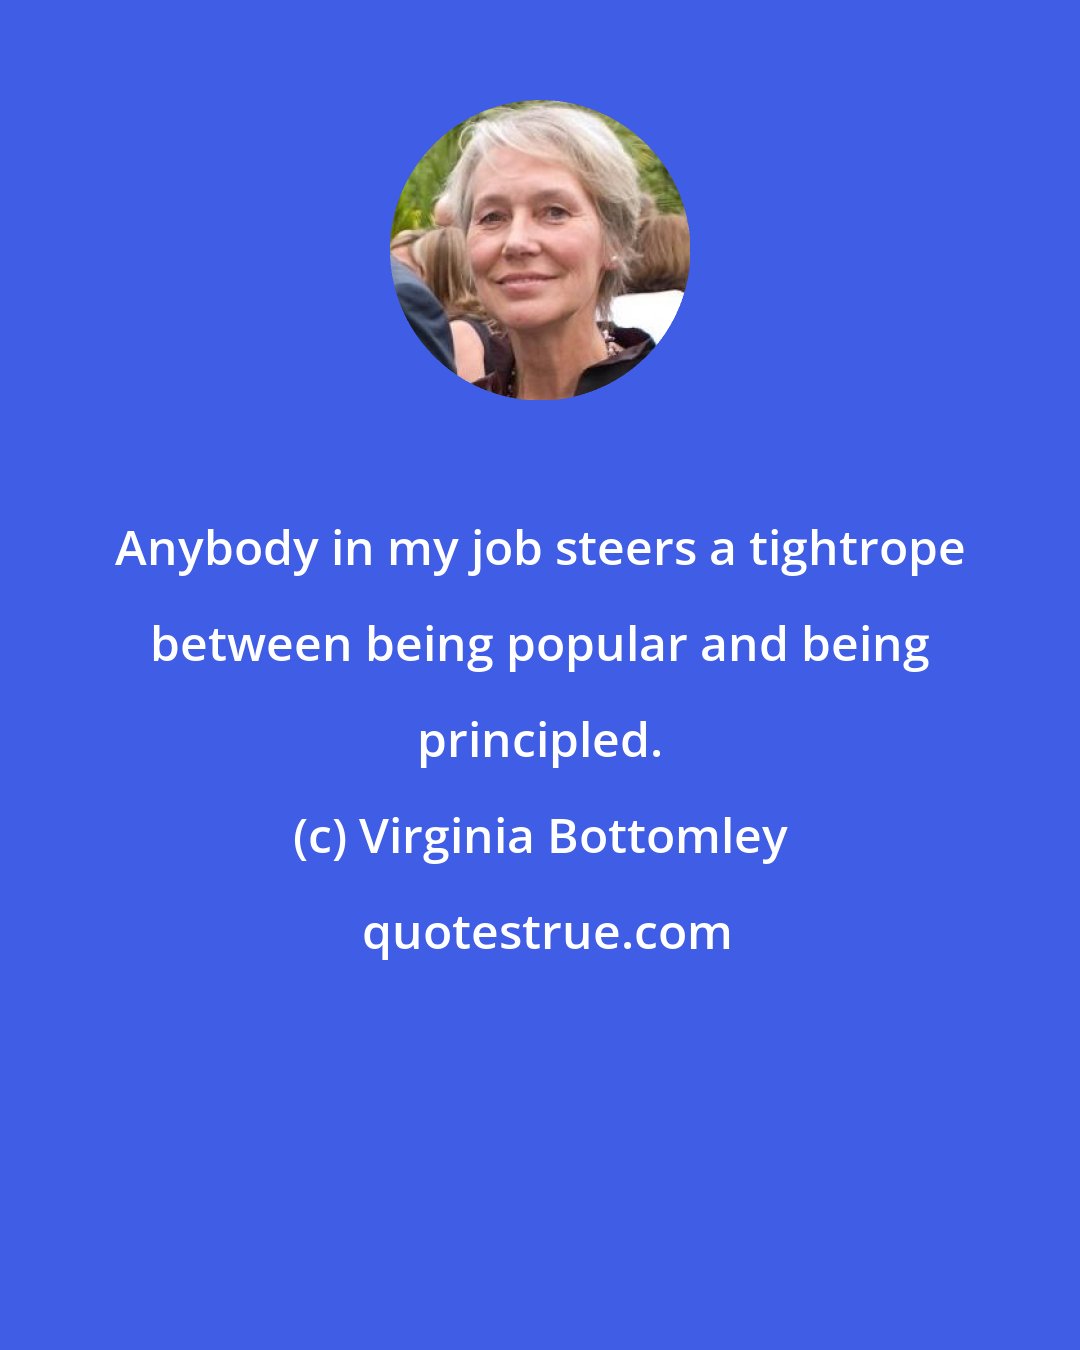 Virginia Bottomley: Anybody in my job steers a tightrope between being popular and being principled.